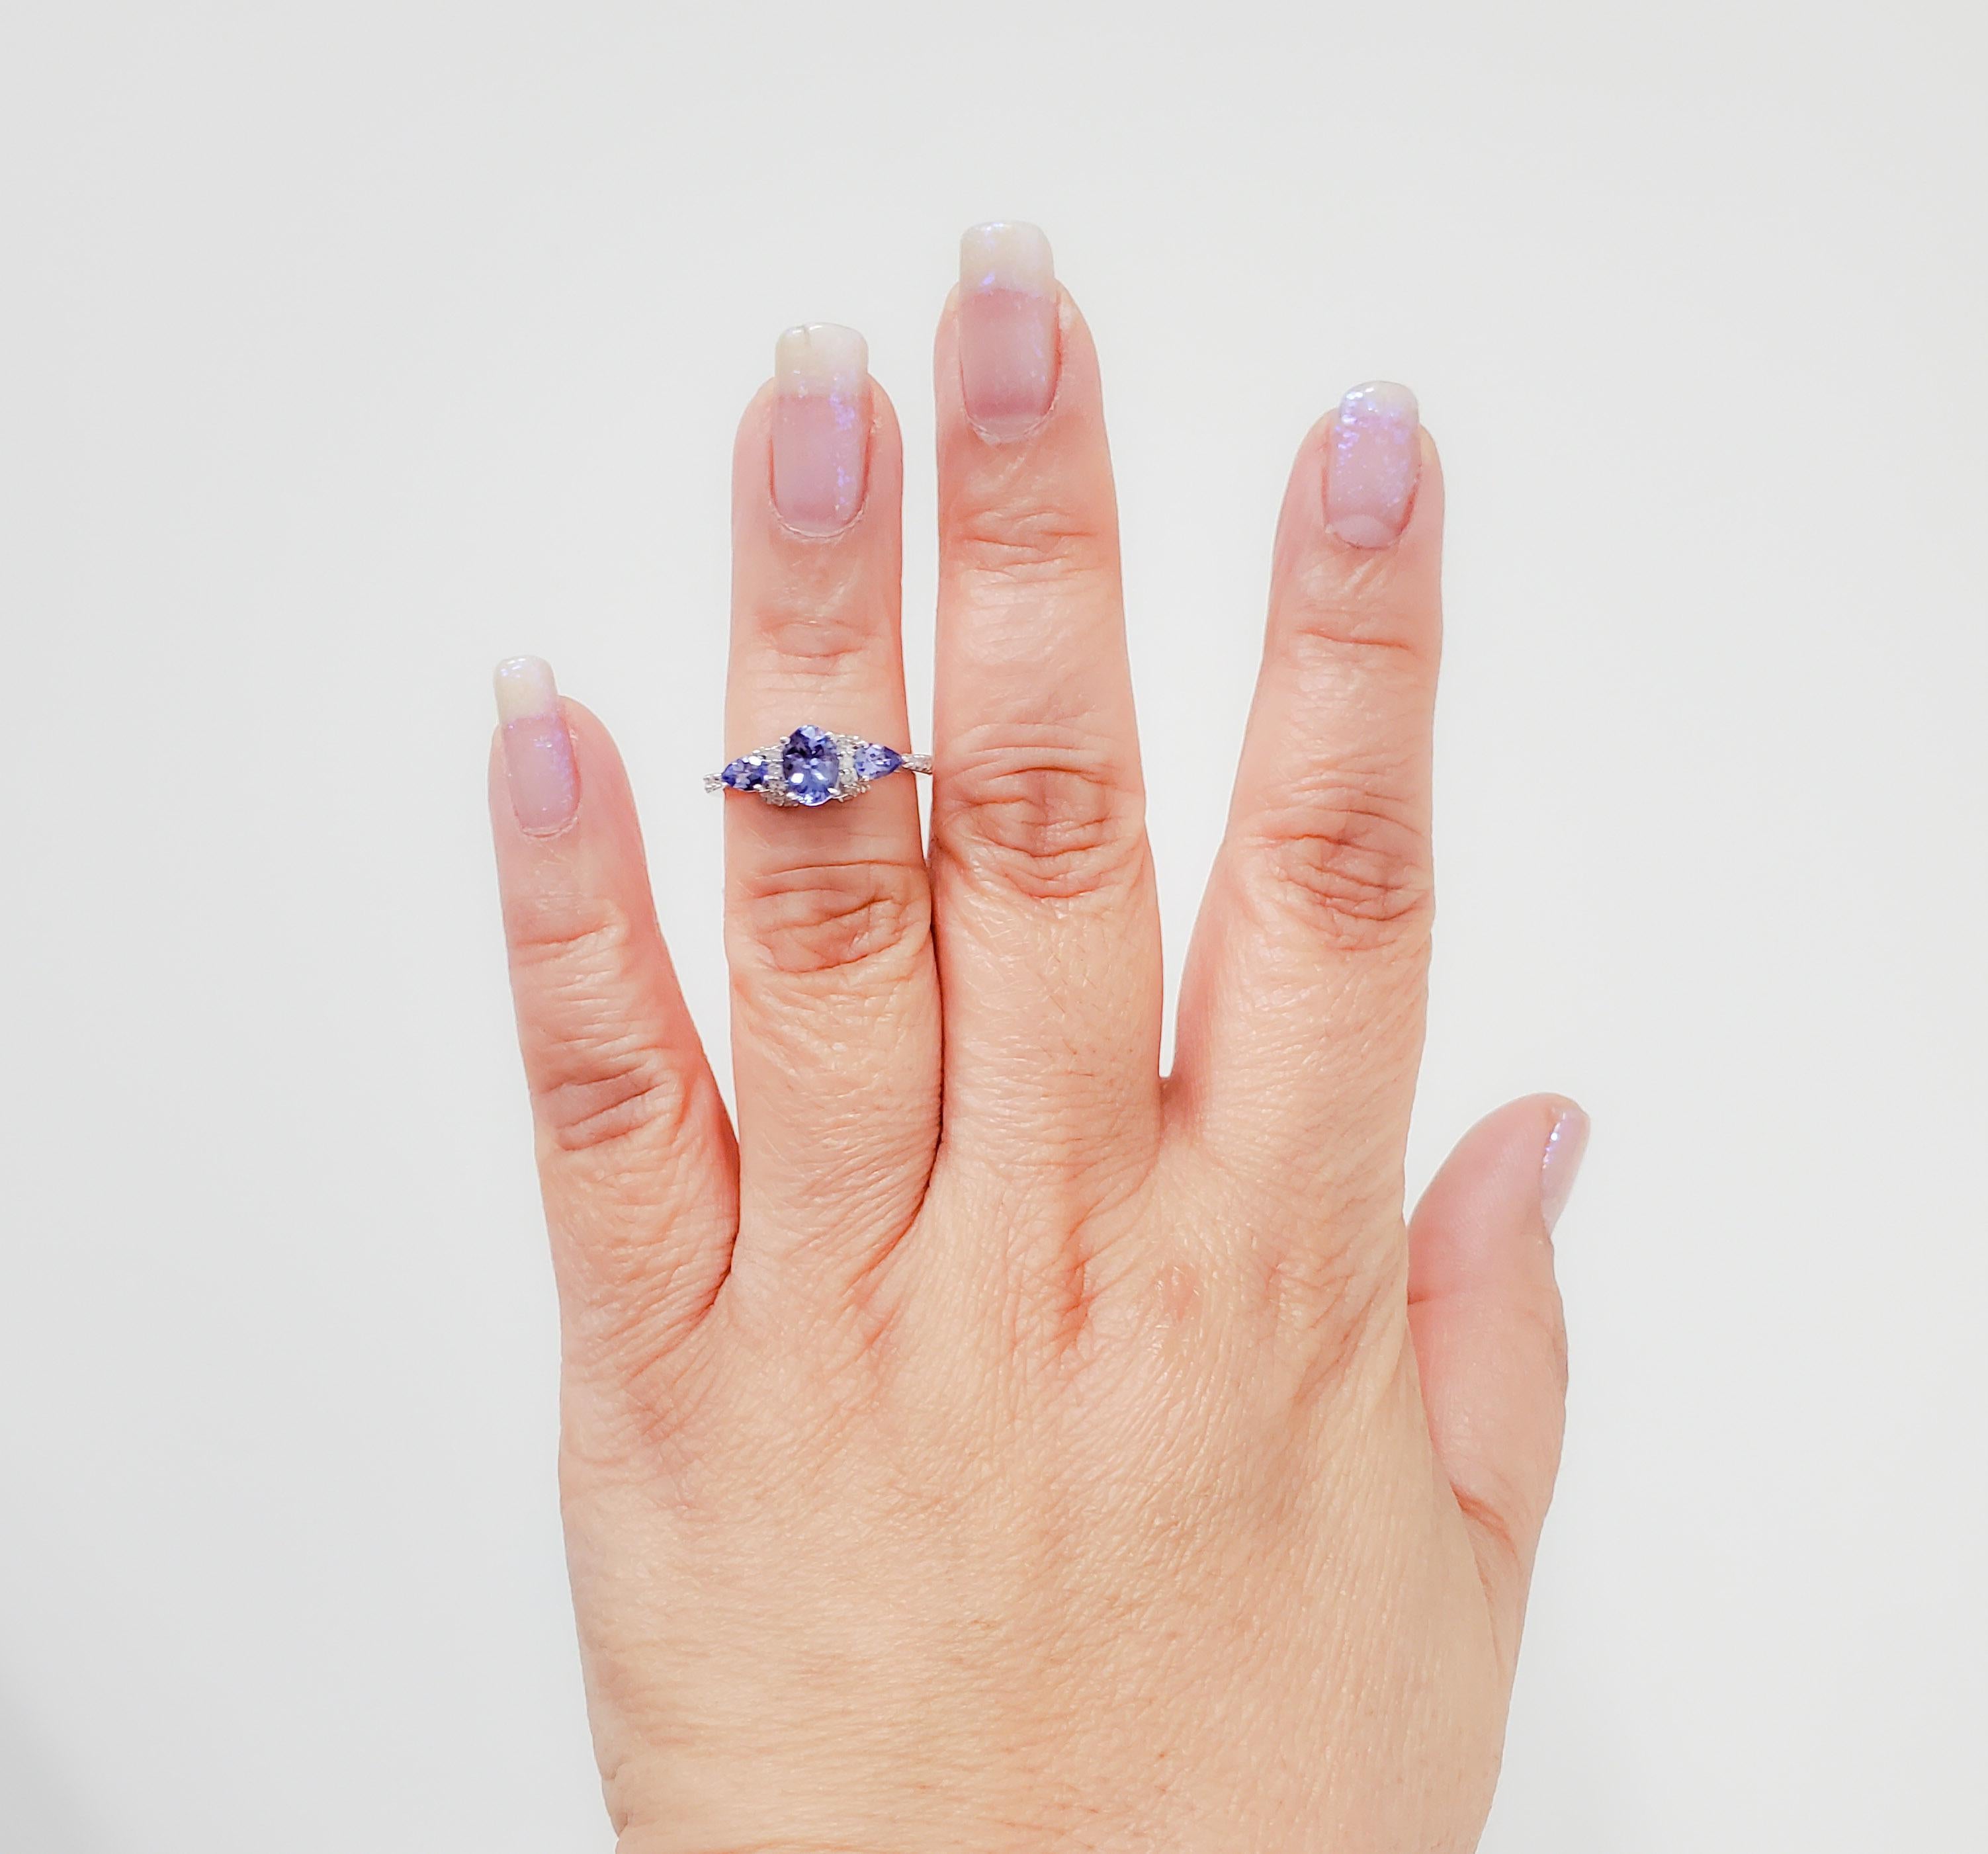 Beautiful 3 stone ring with 1.11 ct. of tanzanite oval and pear shapes and 0.23 ct. of good quality white diamond rounds.  Handmade in 14k white gold.  Ring size 7.25.